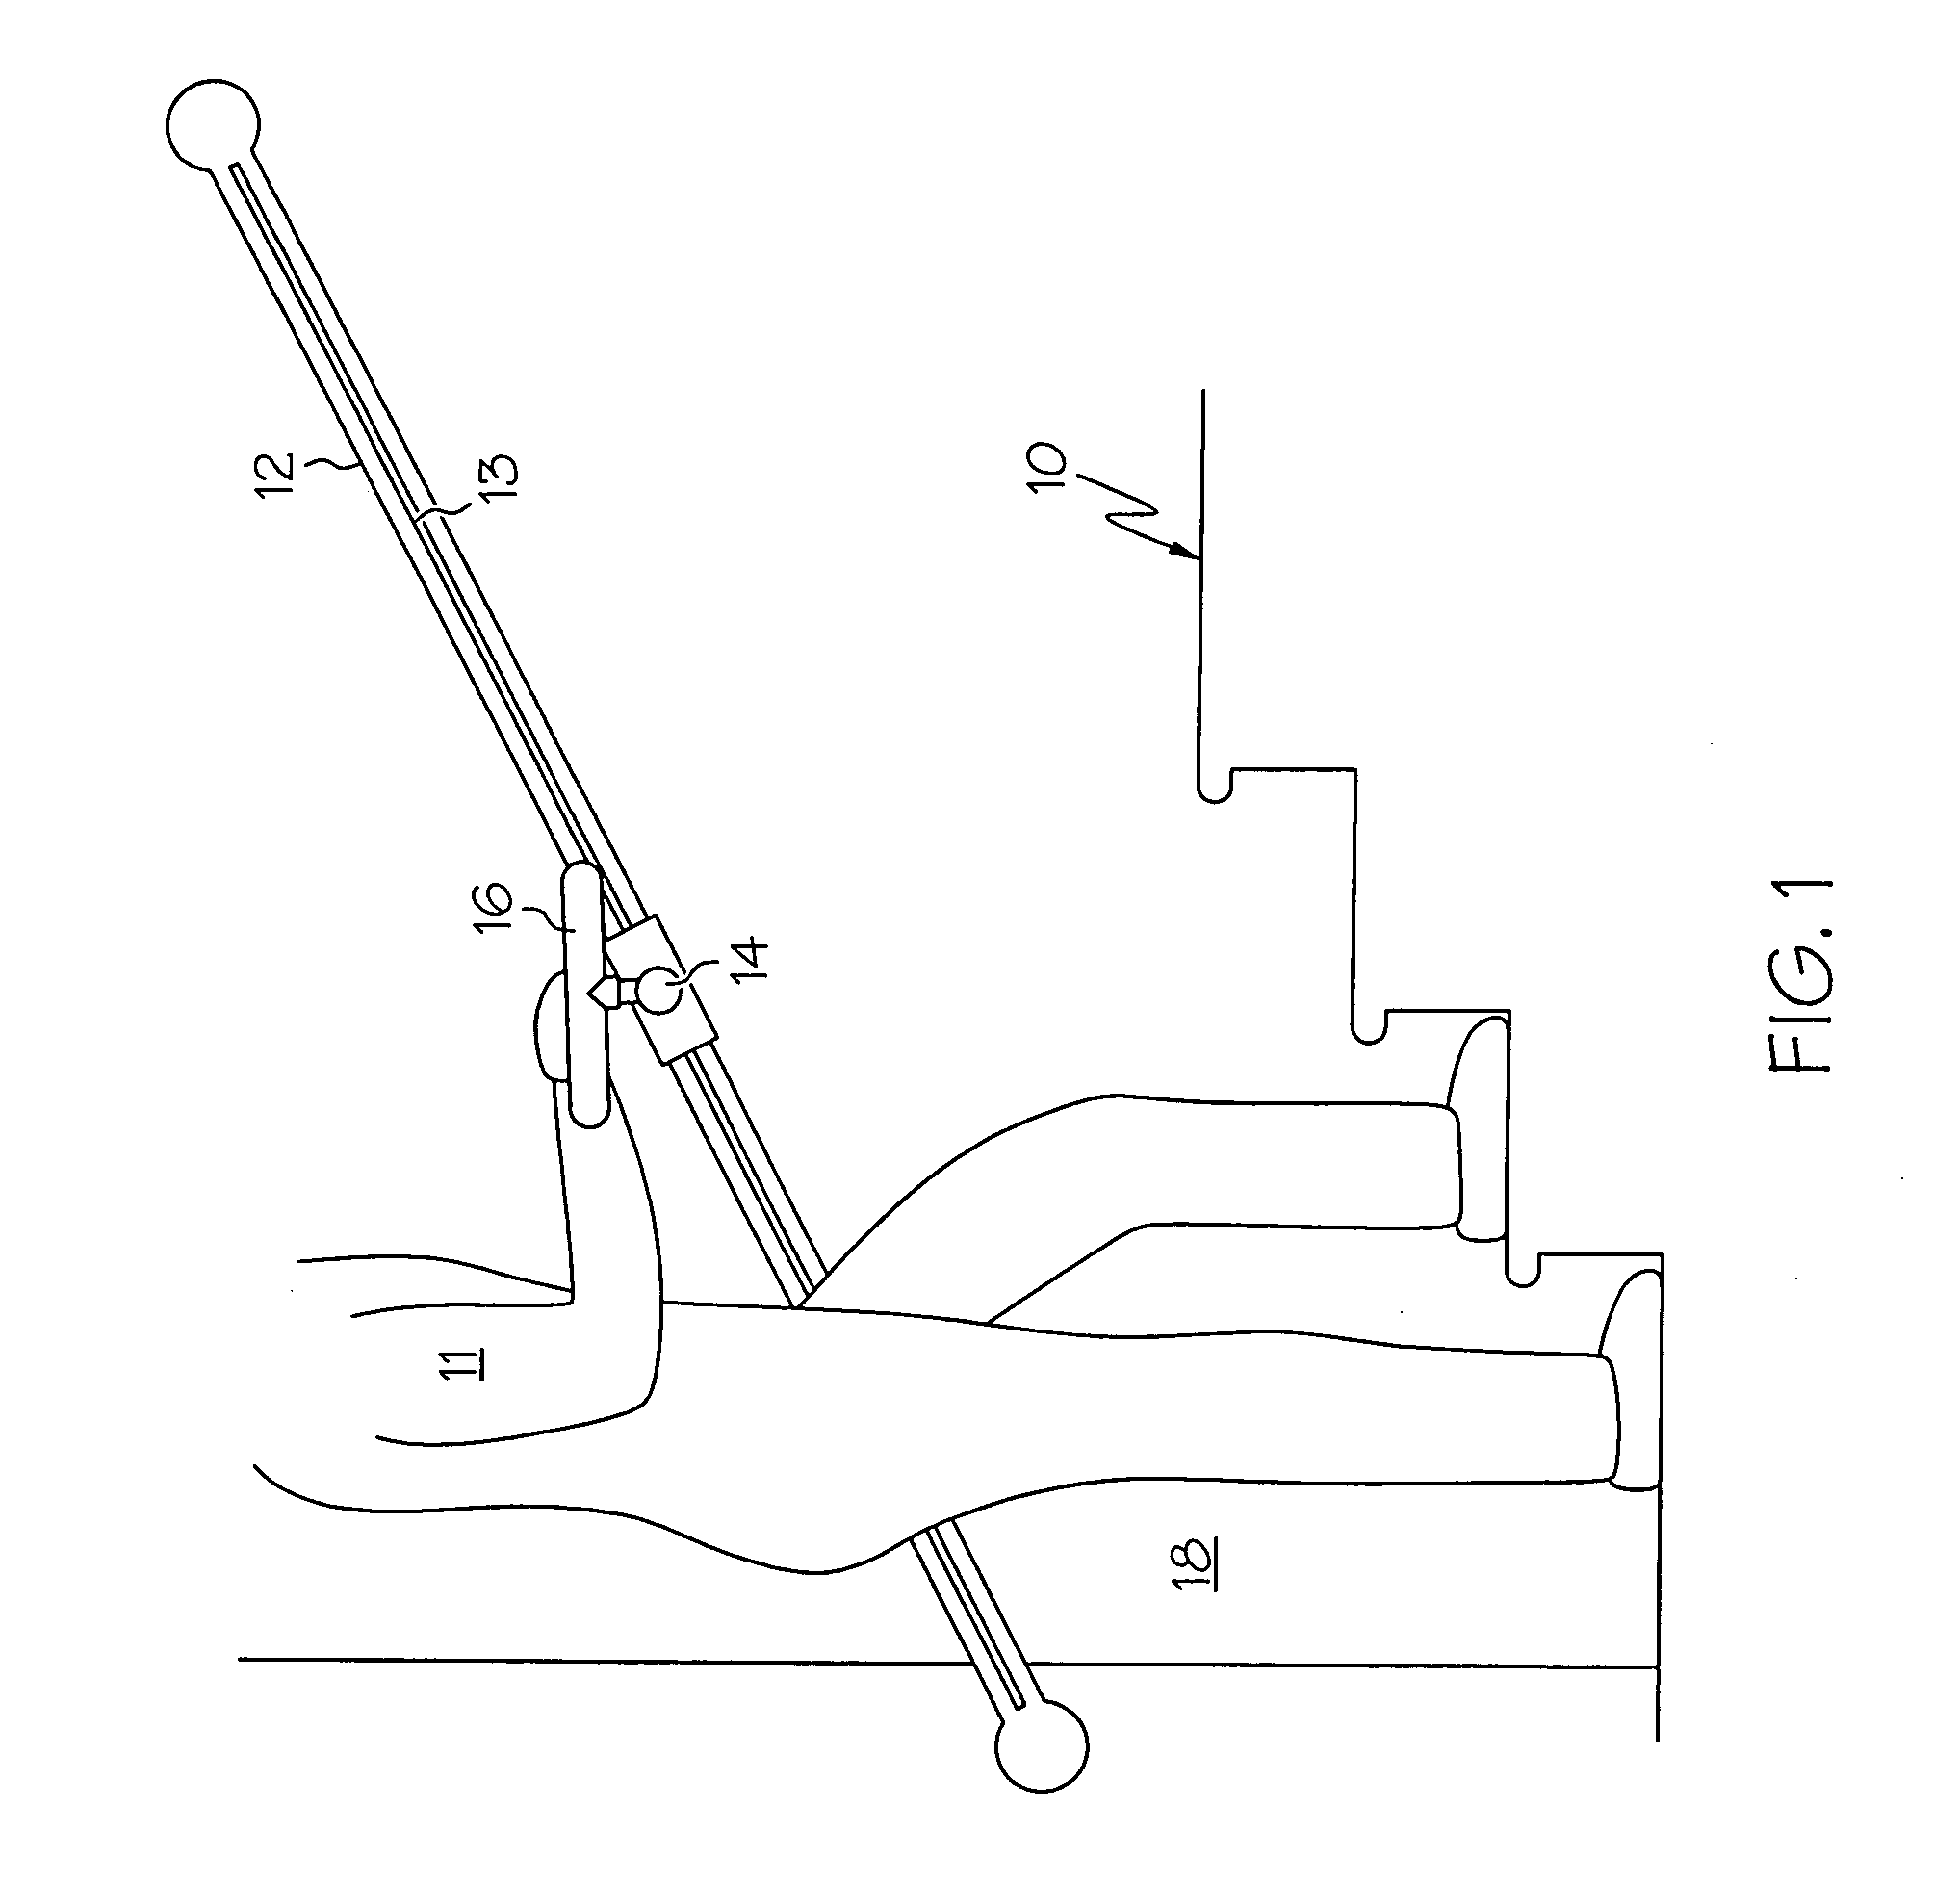 Assist apparatus and method